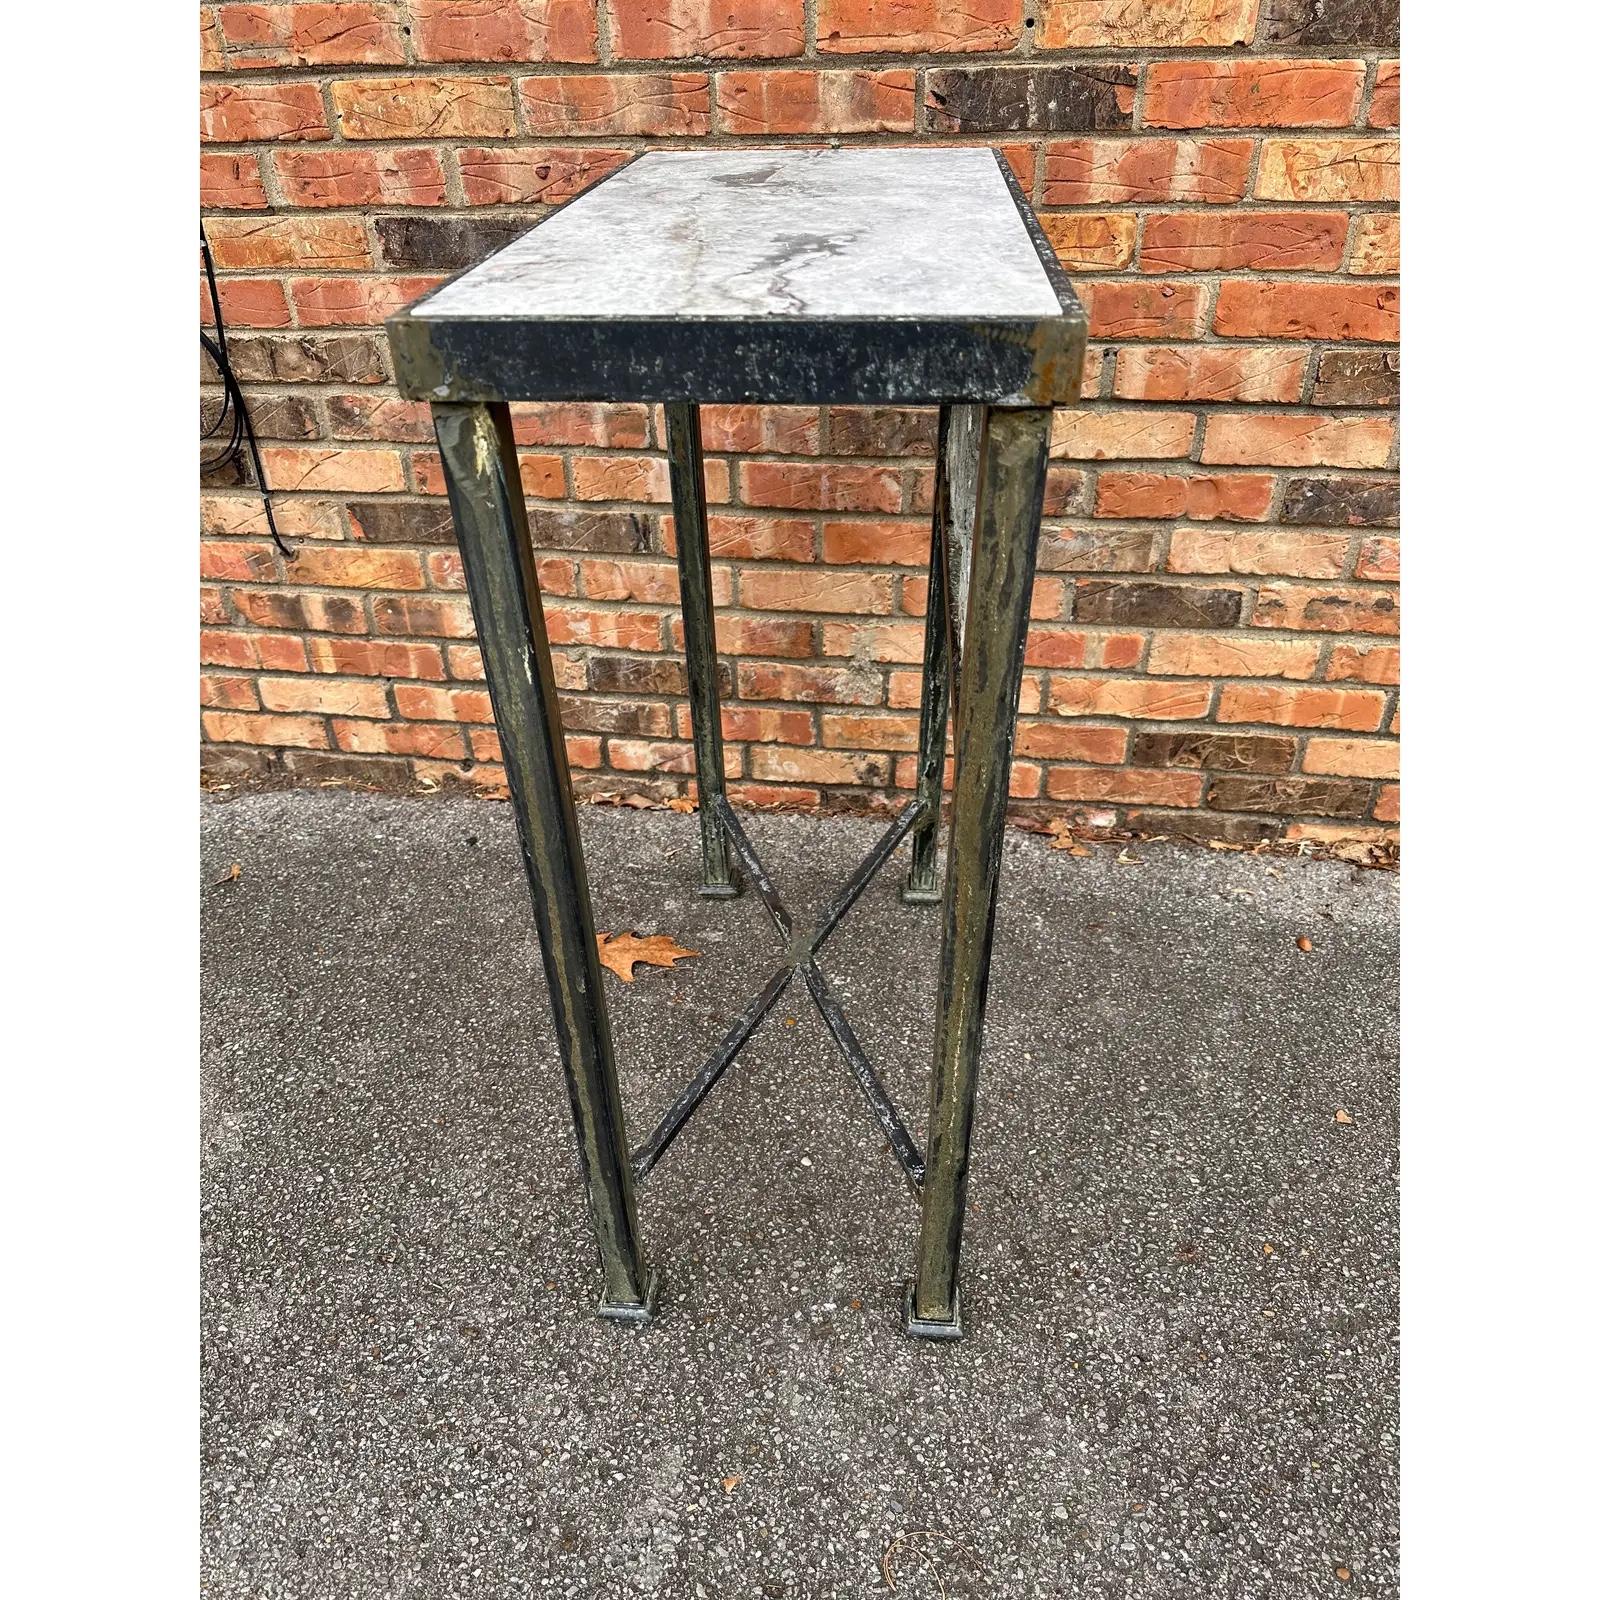 This is a beautiful little iron side table! Custom made following an antique French style. The iron has a distressed finish, with gray running along the legs matching the ornamental paisley design of the front and focal point of the piece. The top